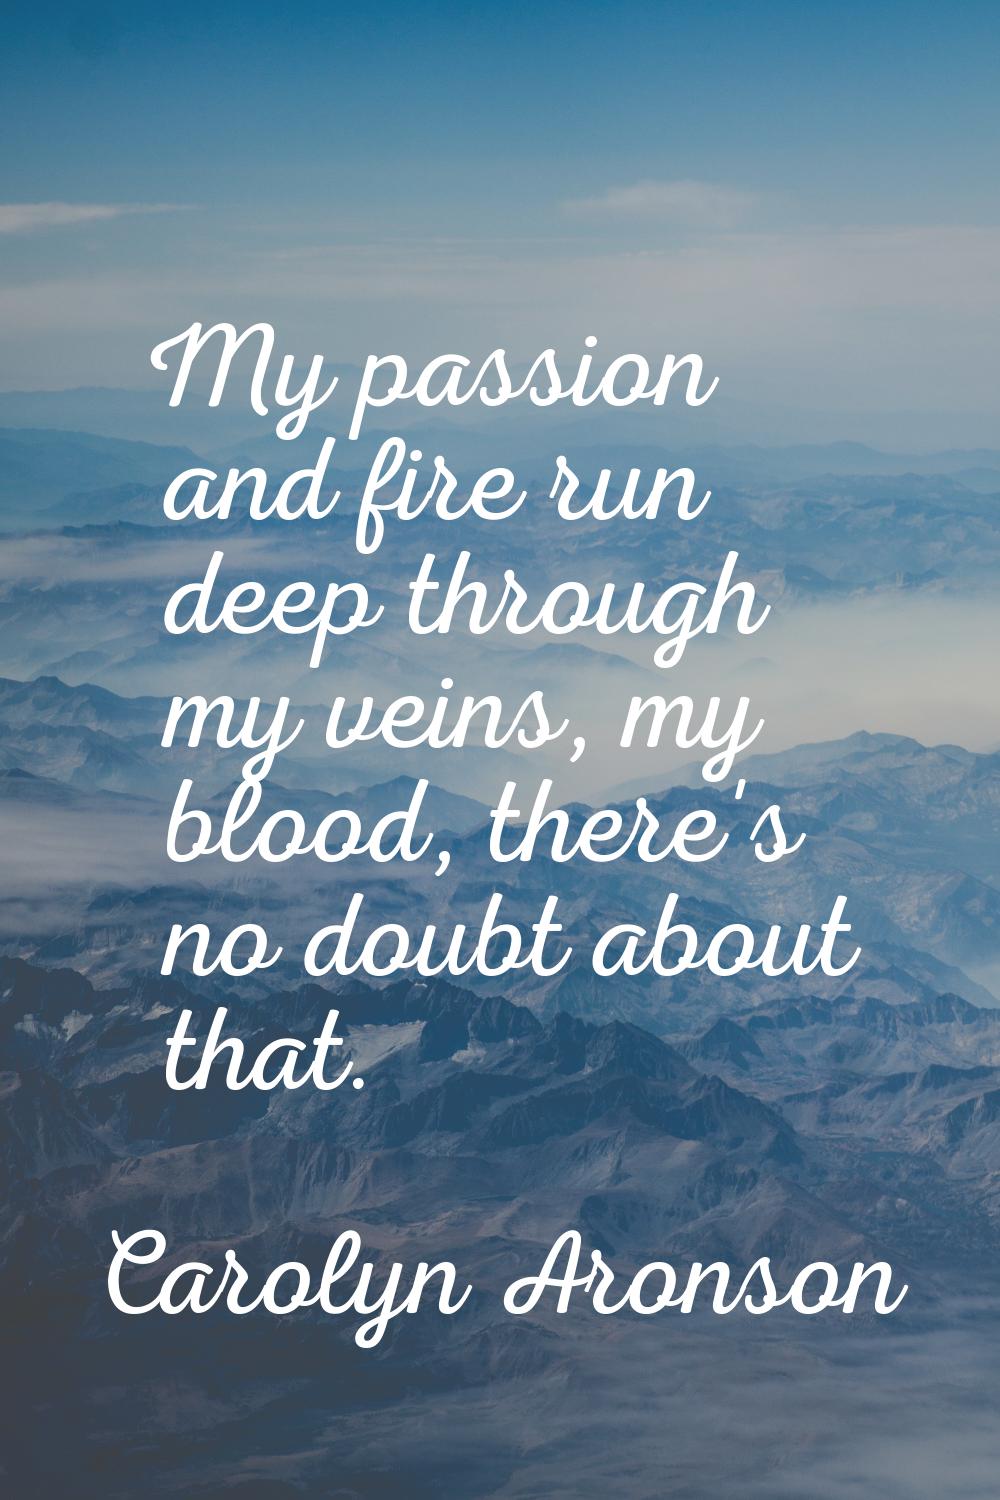 My passion and fire run deep through my veins, my blood, there's no doubt about that.